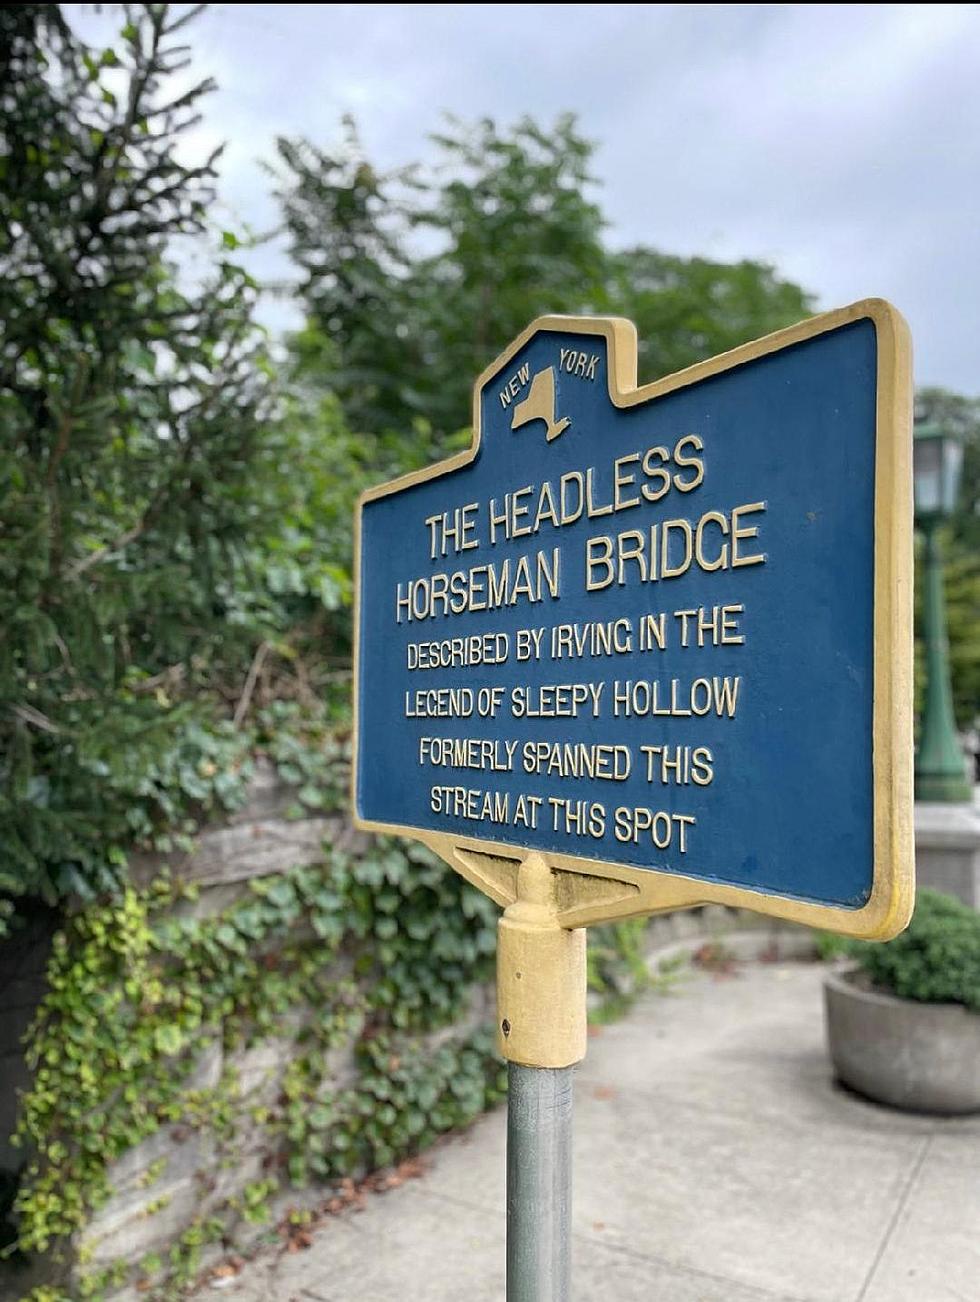 Things You May Not Know About The Headless Horseman Bridge